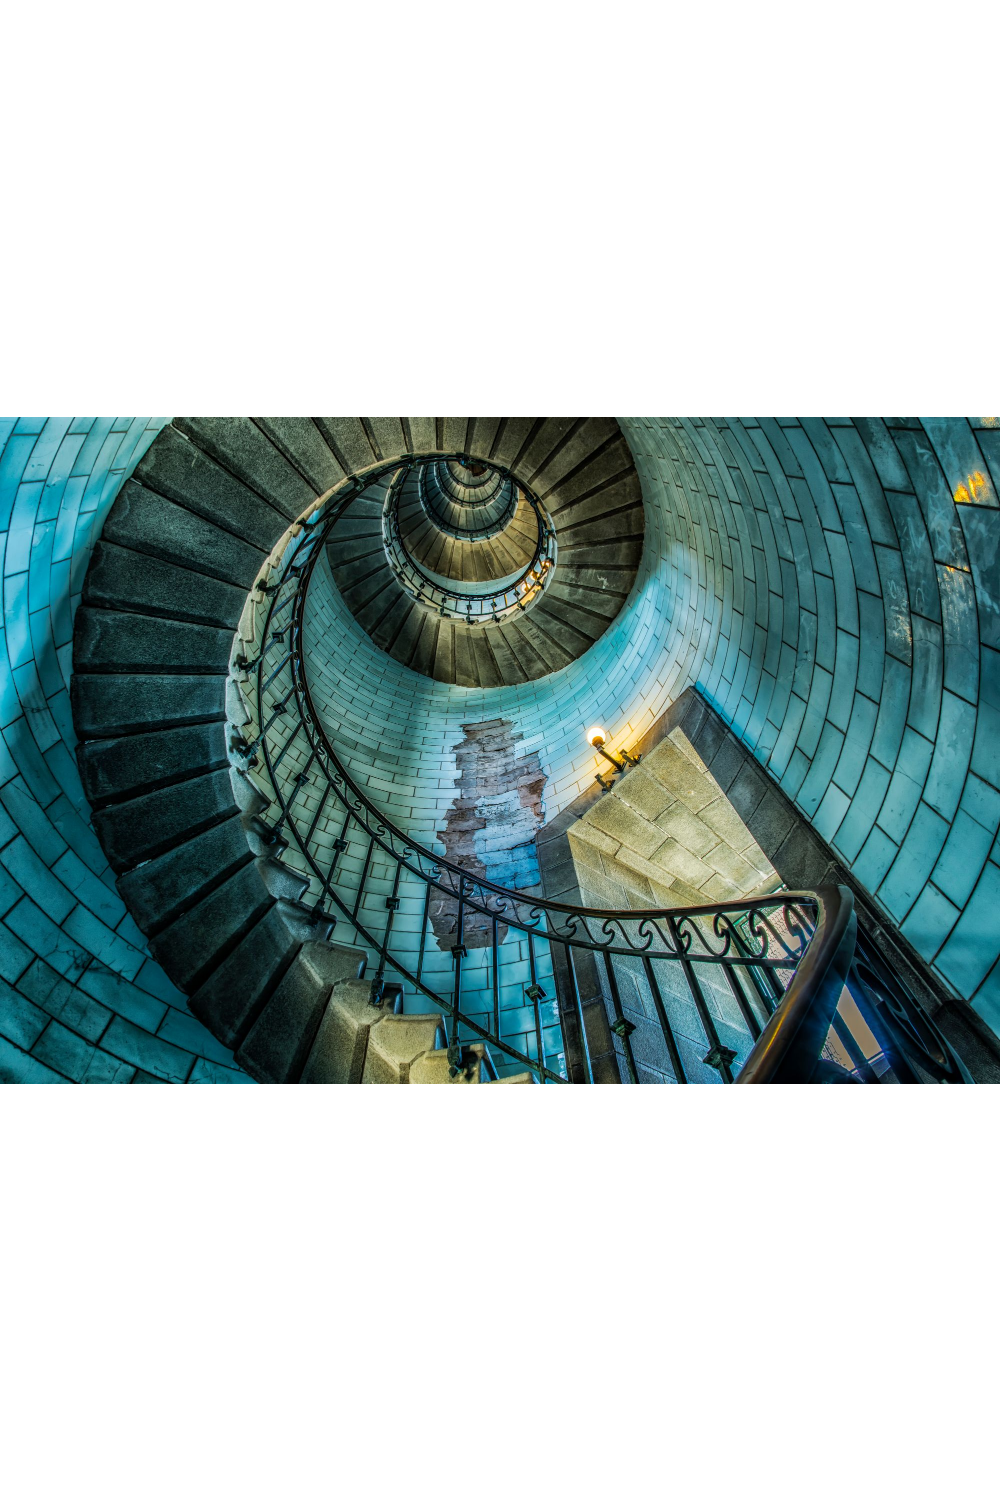 Spiral Photographic Artwork | Andrew Martin Lighthouse Staircase | Oroa.com.